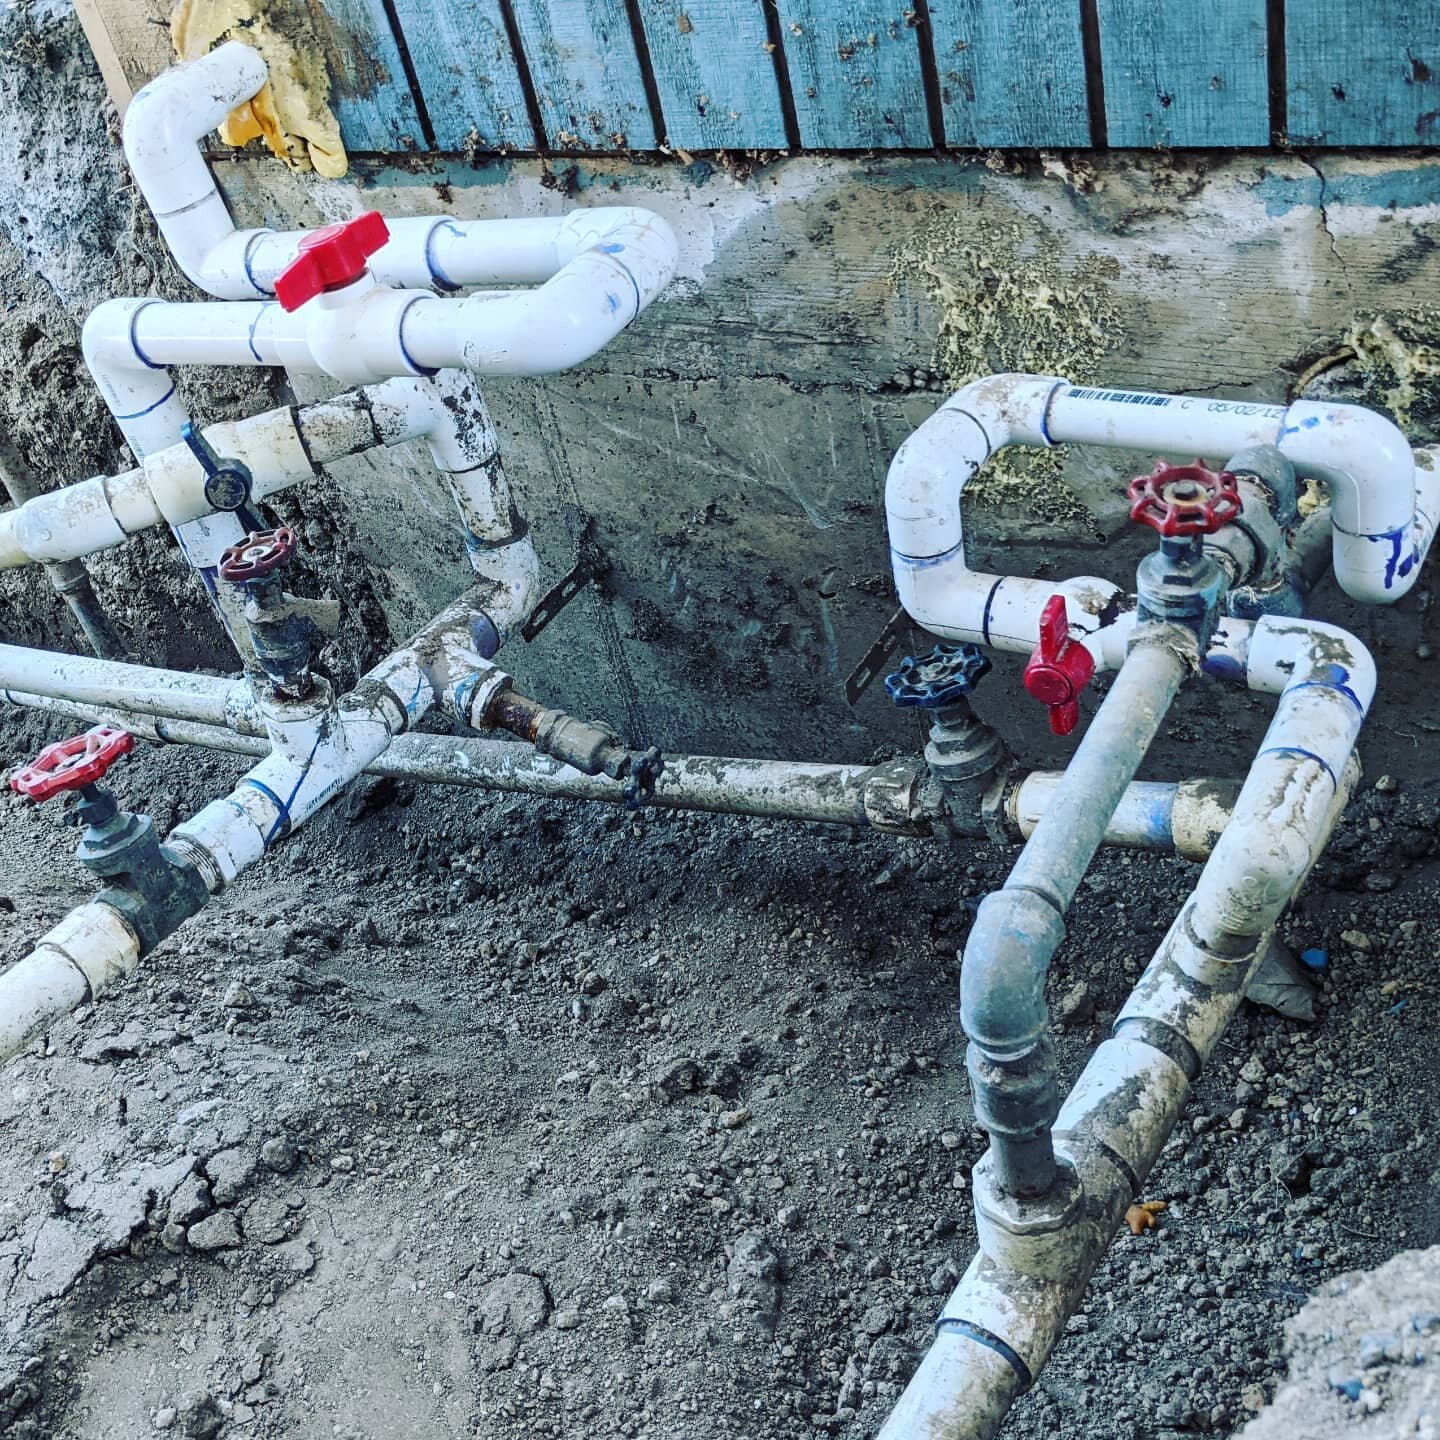 You never know what you're gonna find underground! Another irrigation system that makes me say, Why?! #waterwhysirrigation #waterwhys #howmanyvalvescanyoucount